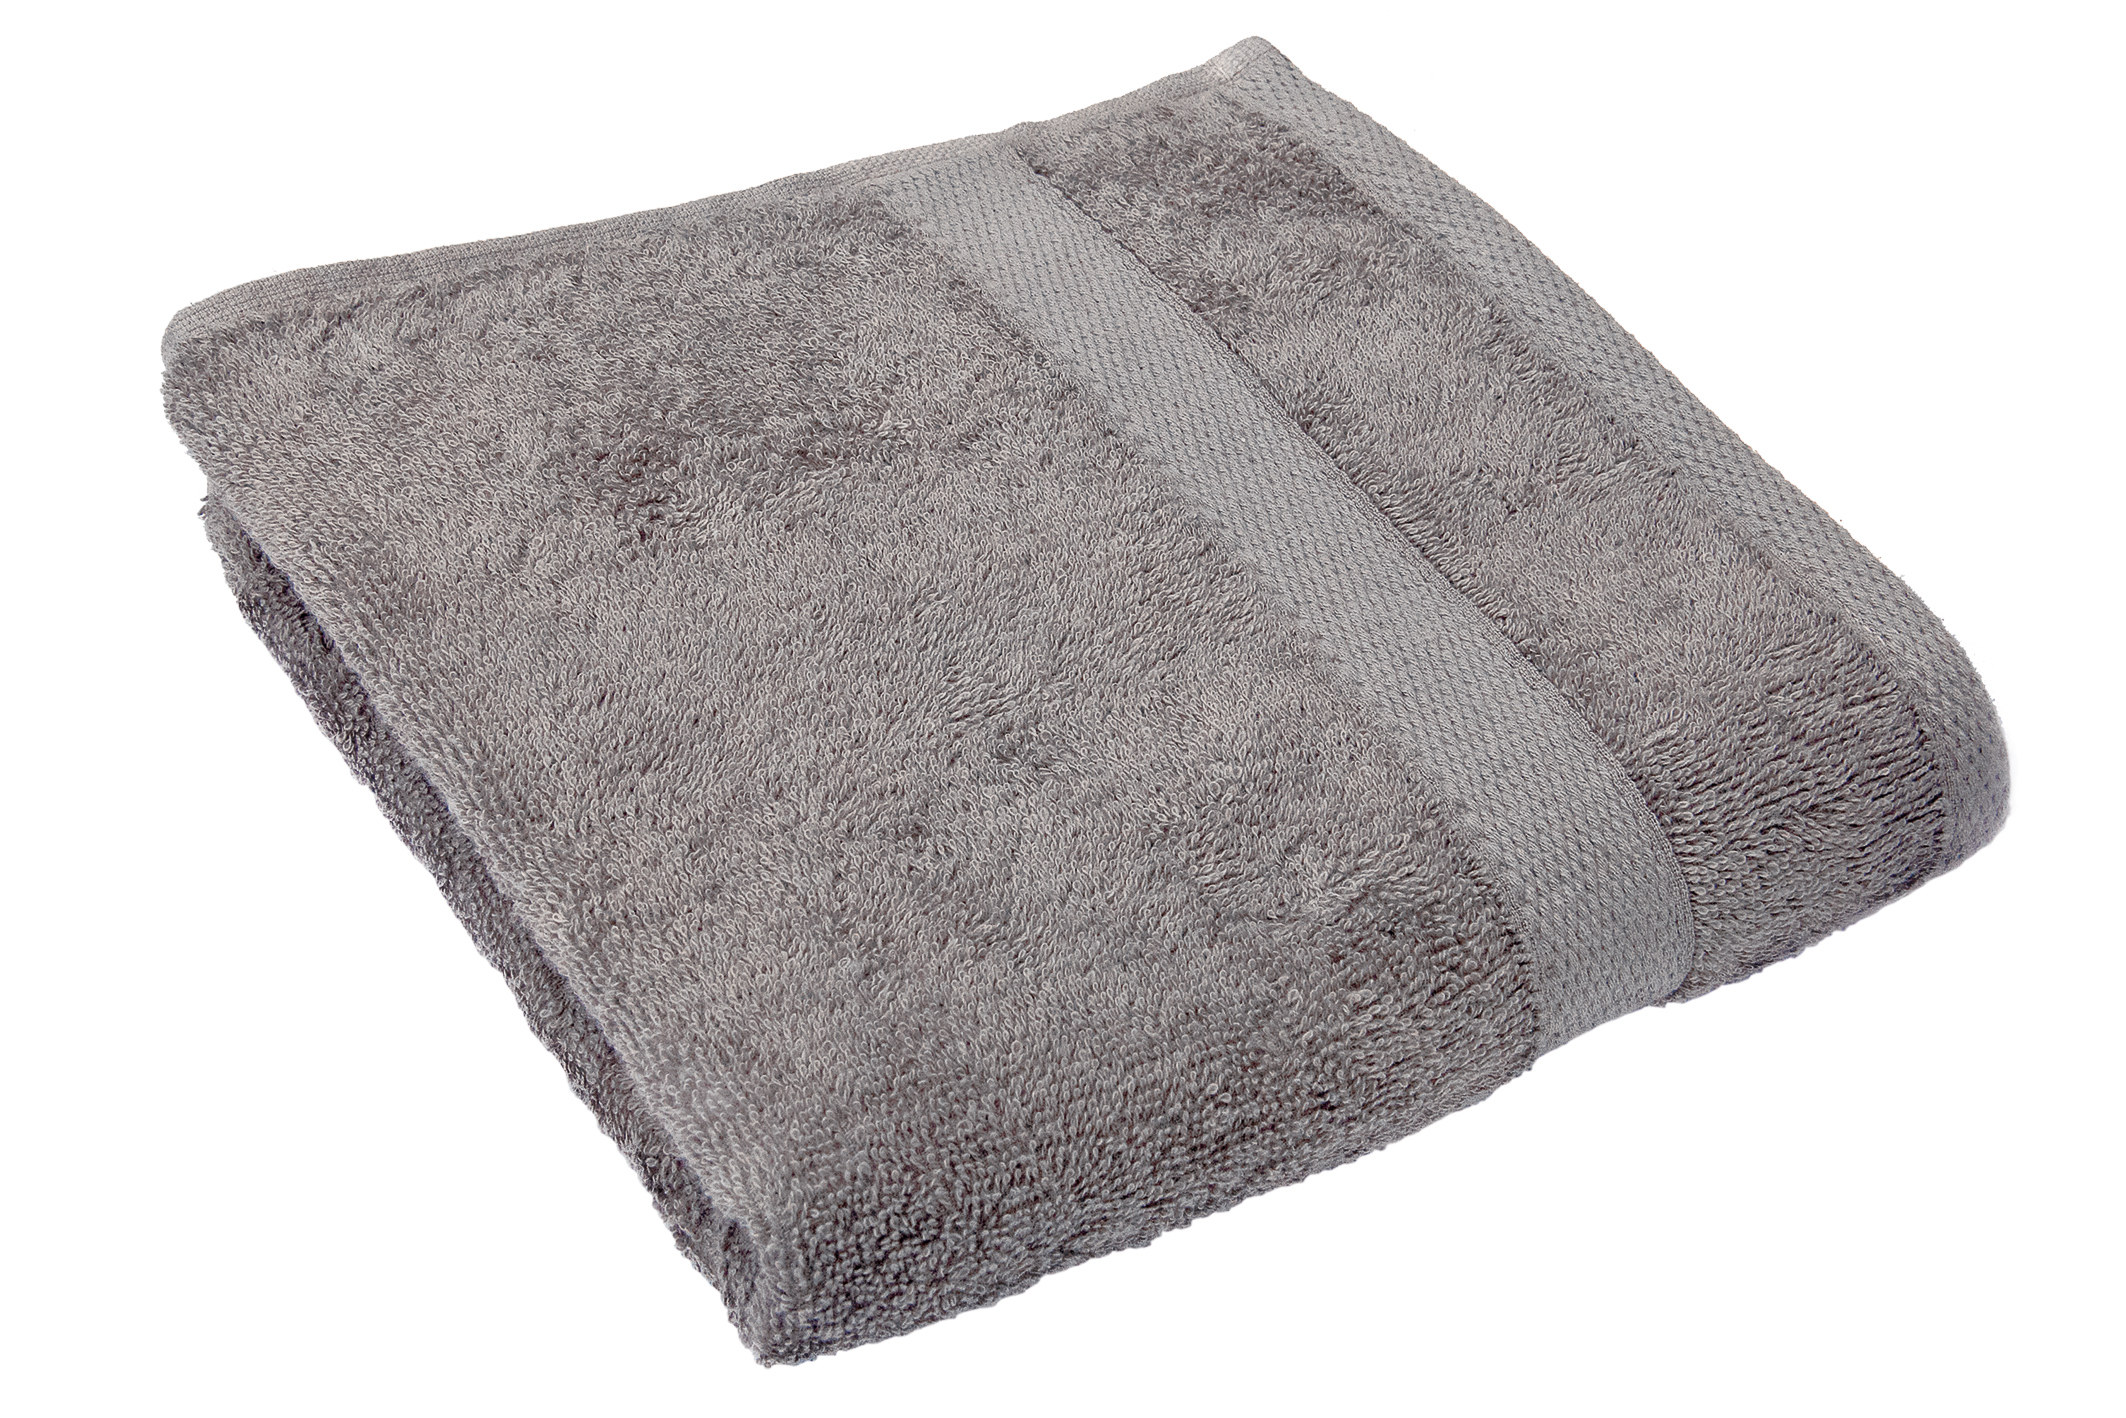 Shower towel 100x150cm, taupe